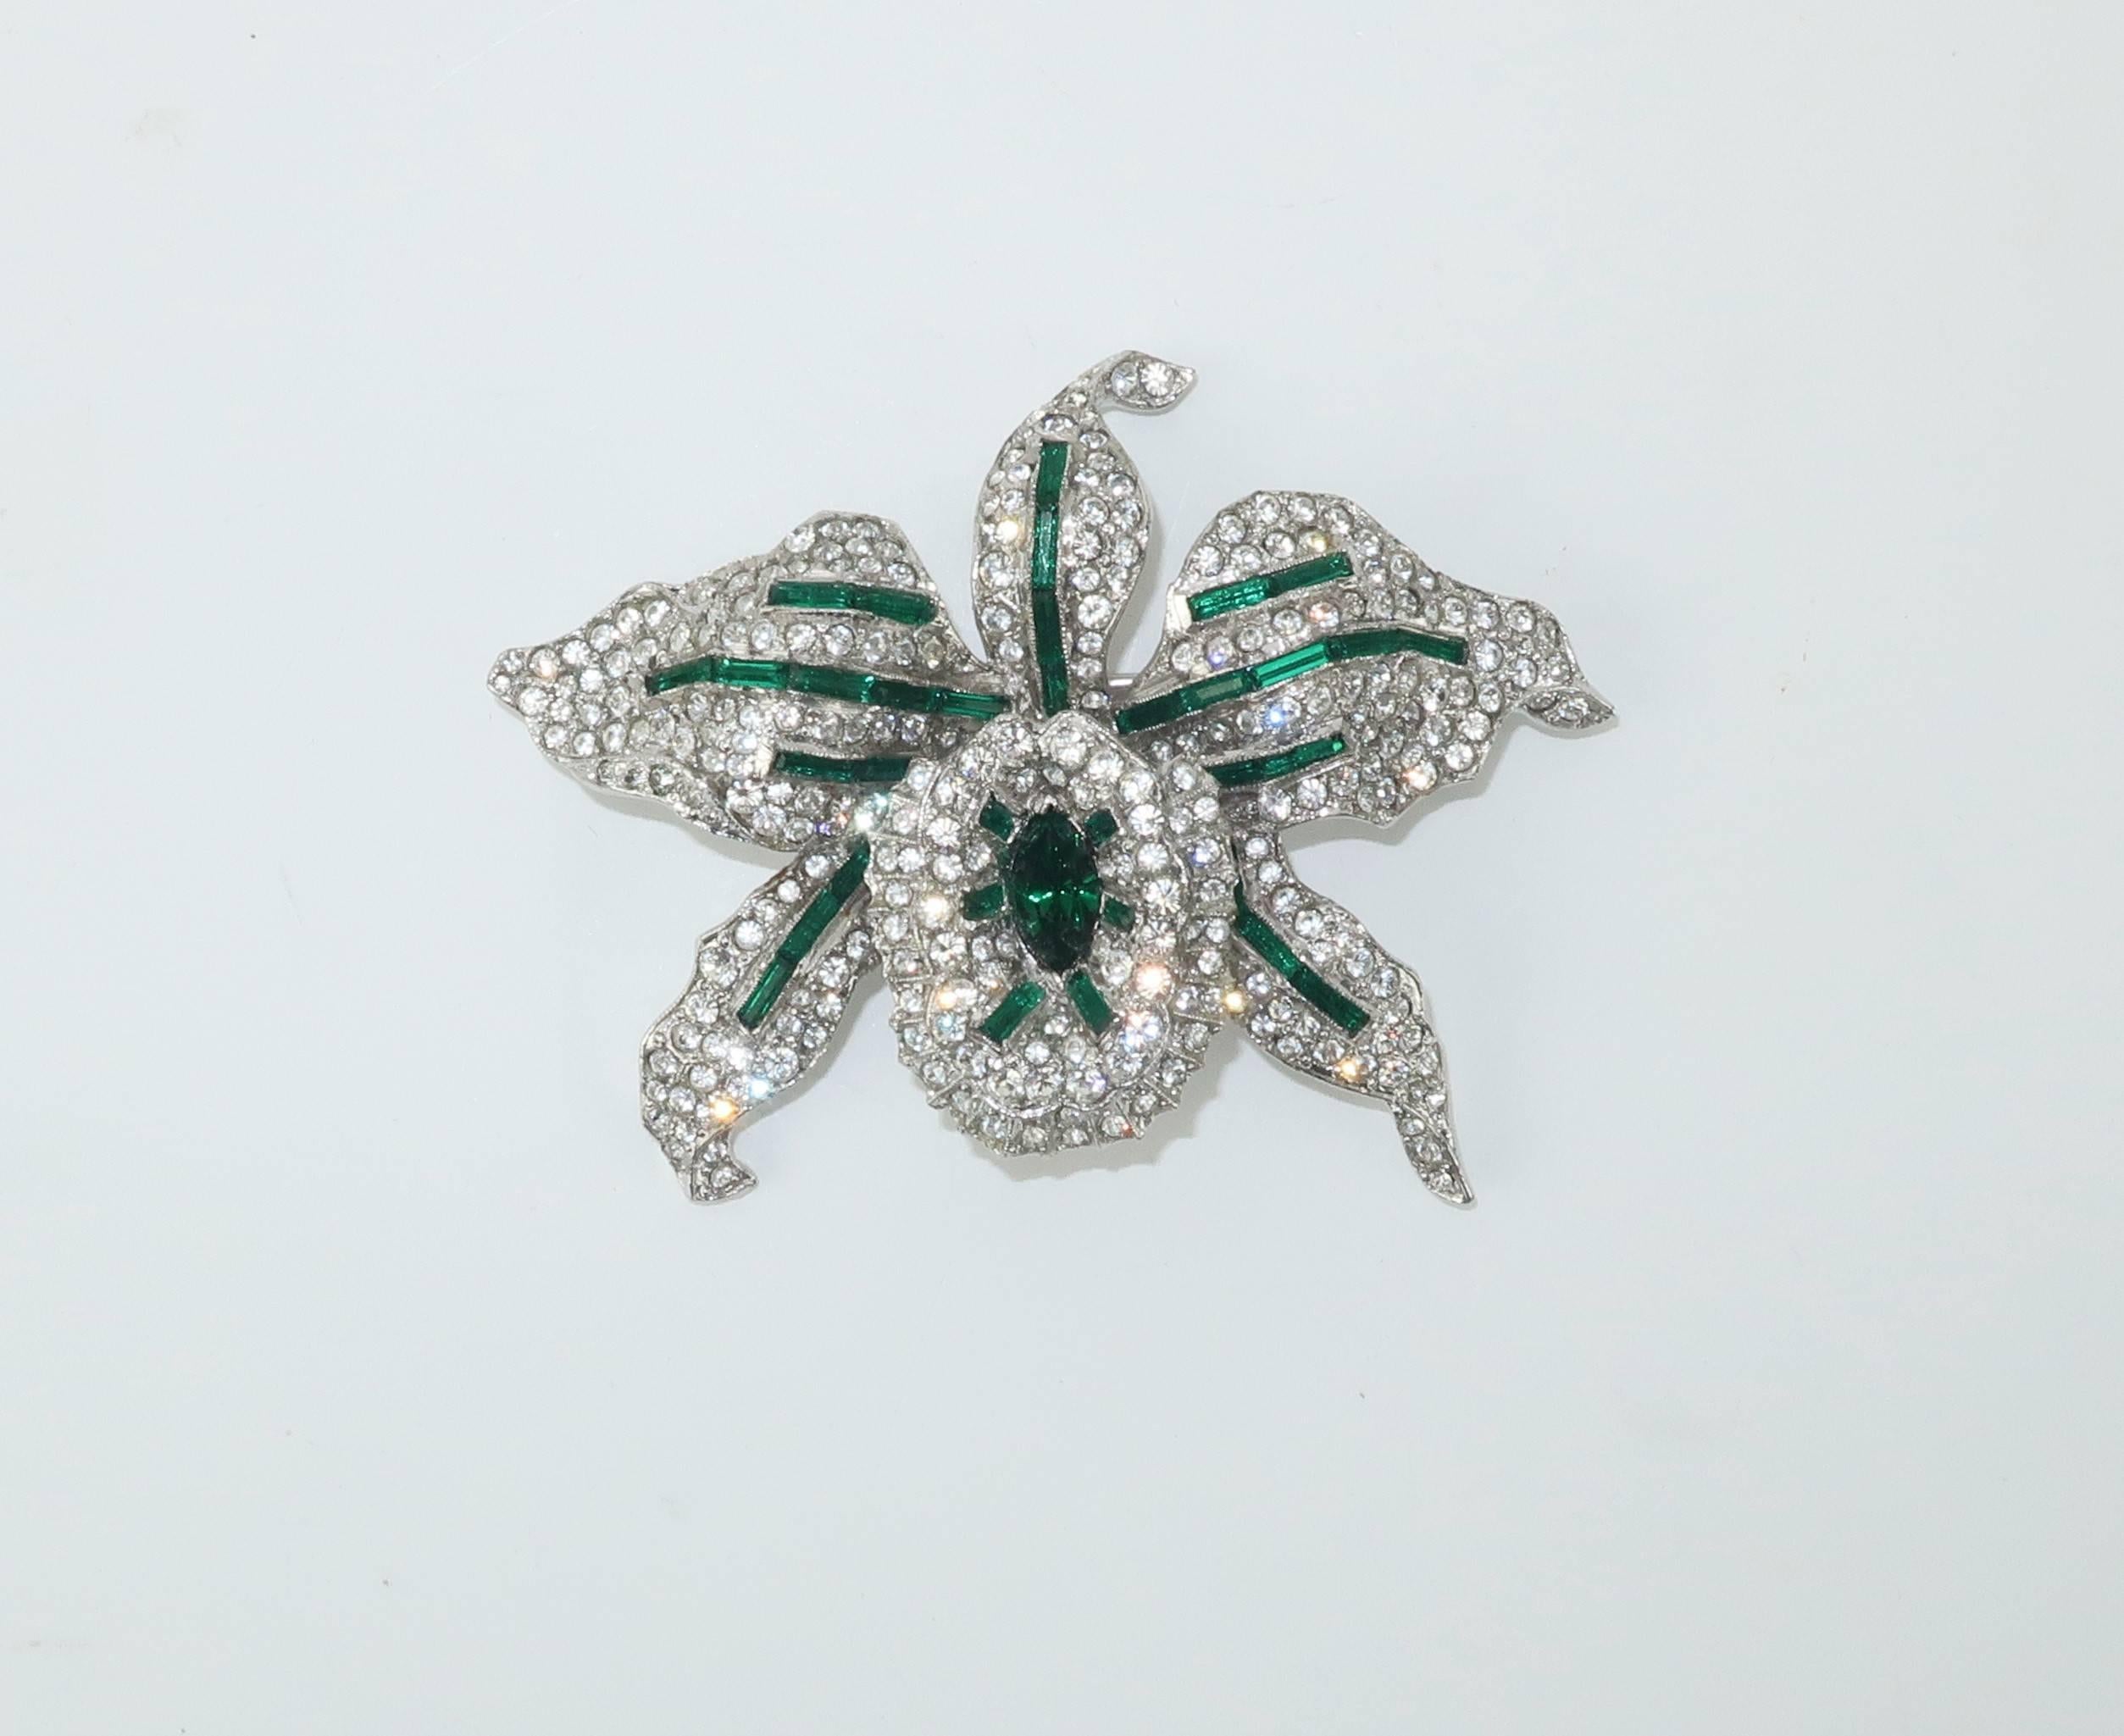 This gorgeous orchid brooch from Trifari with the 1930’s KTF hallmark will turn heads and garner admiration.  The design by Alfred Philippe has all the quality and beauty of fine jewelry with sparkling crystal rhinestones accented with emerald green